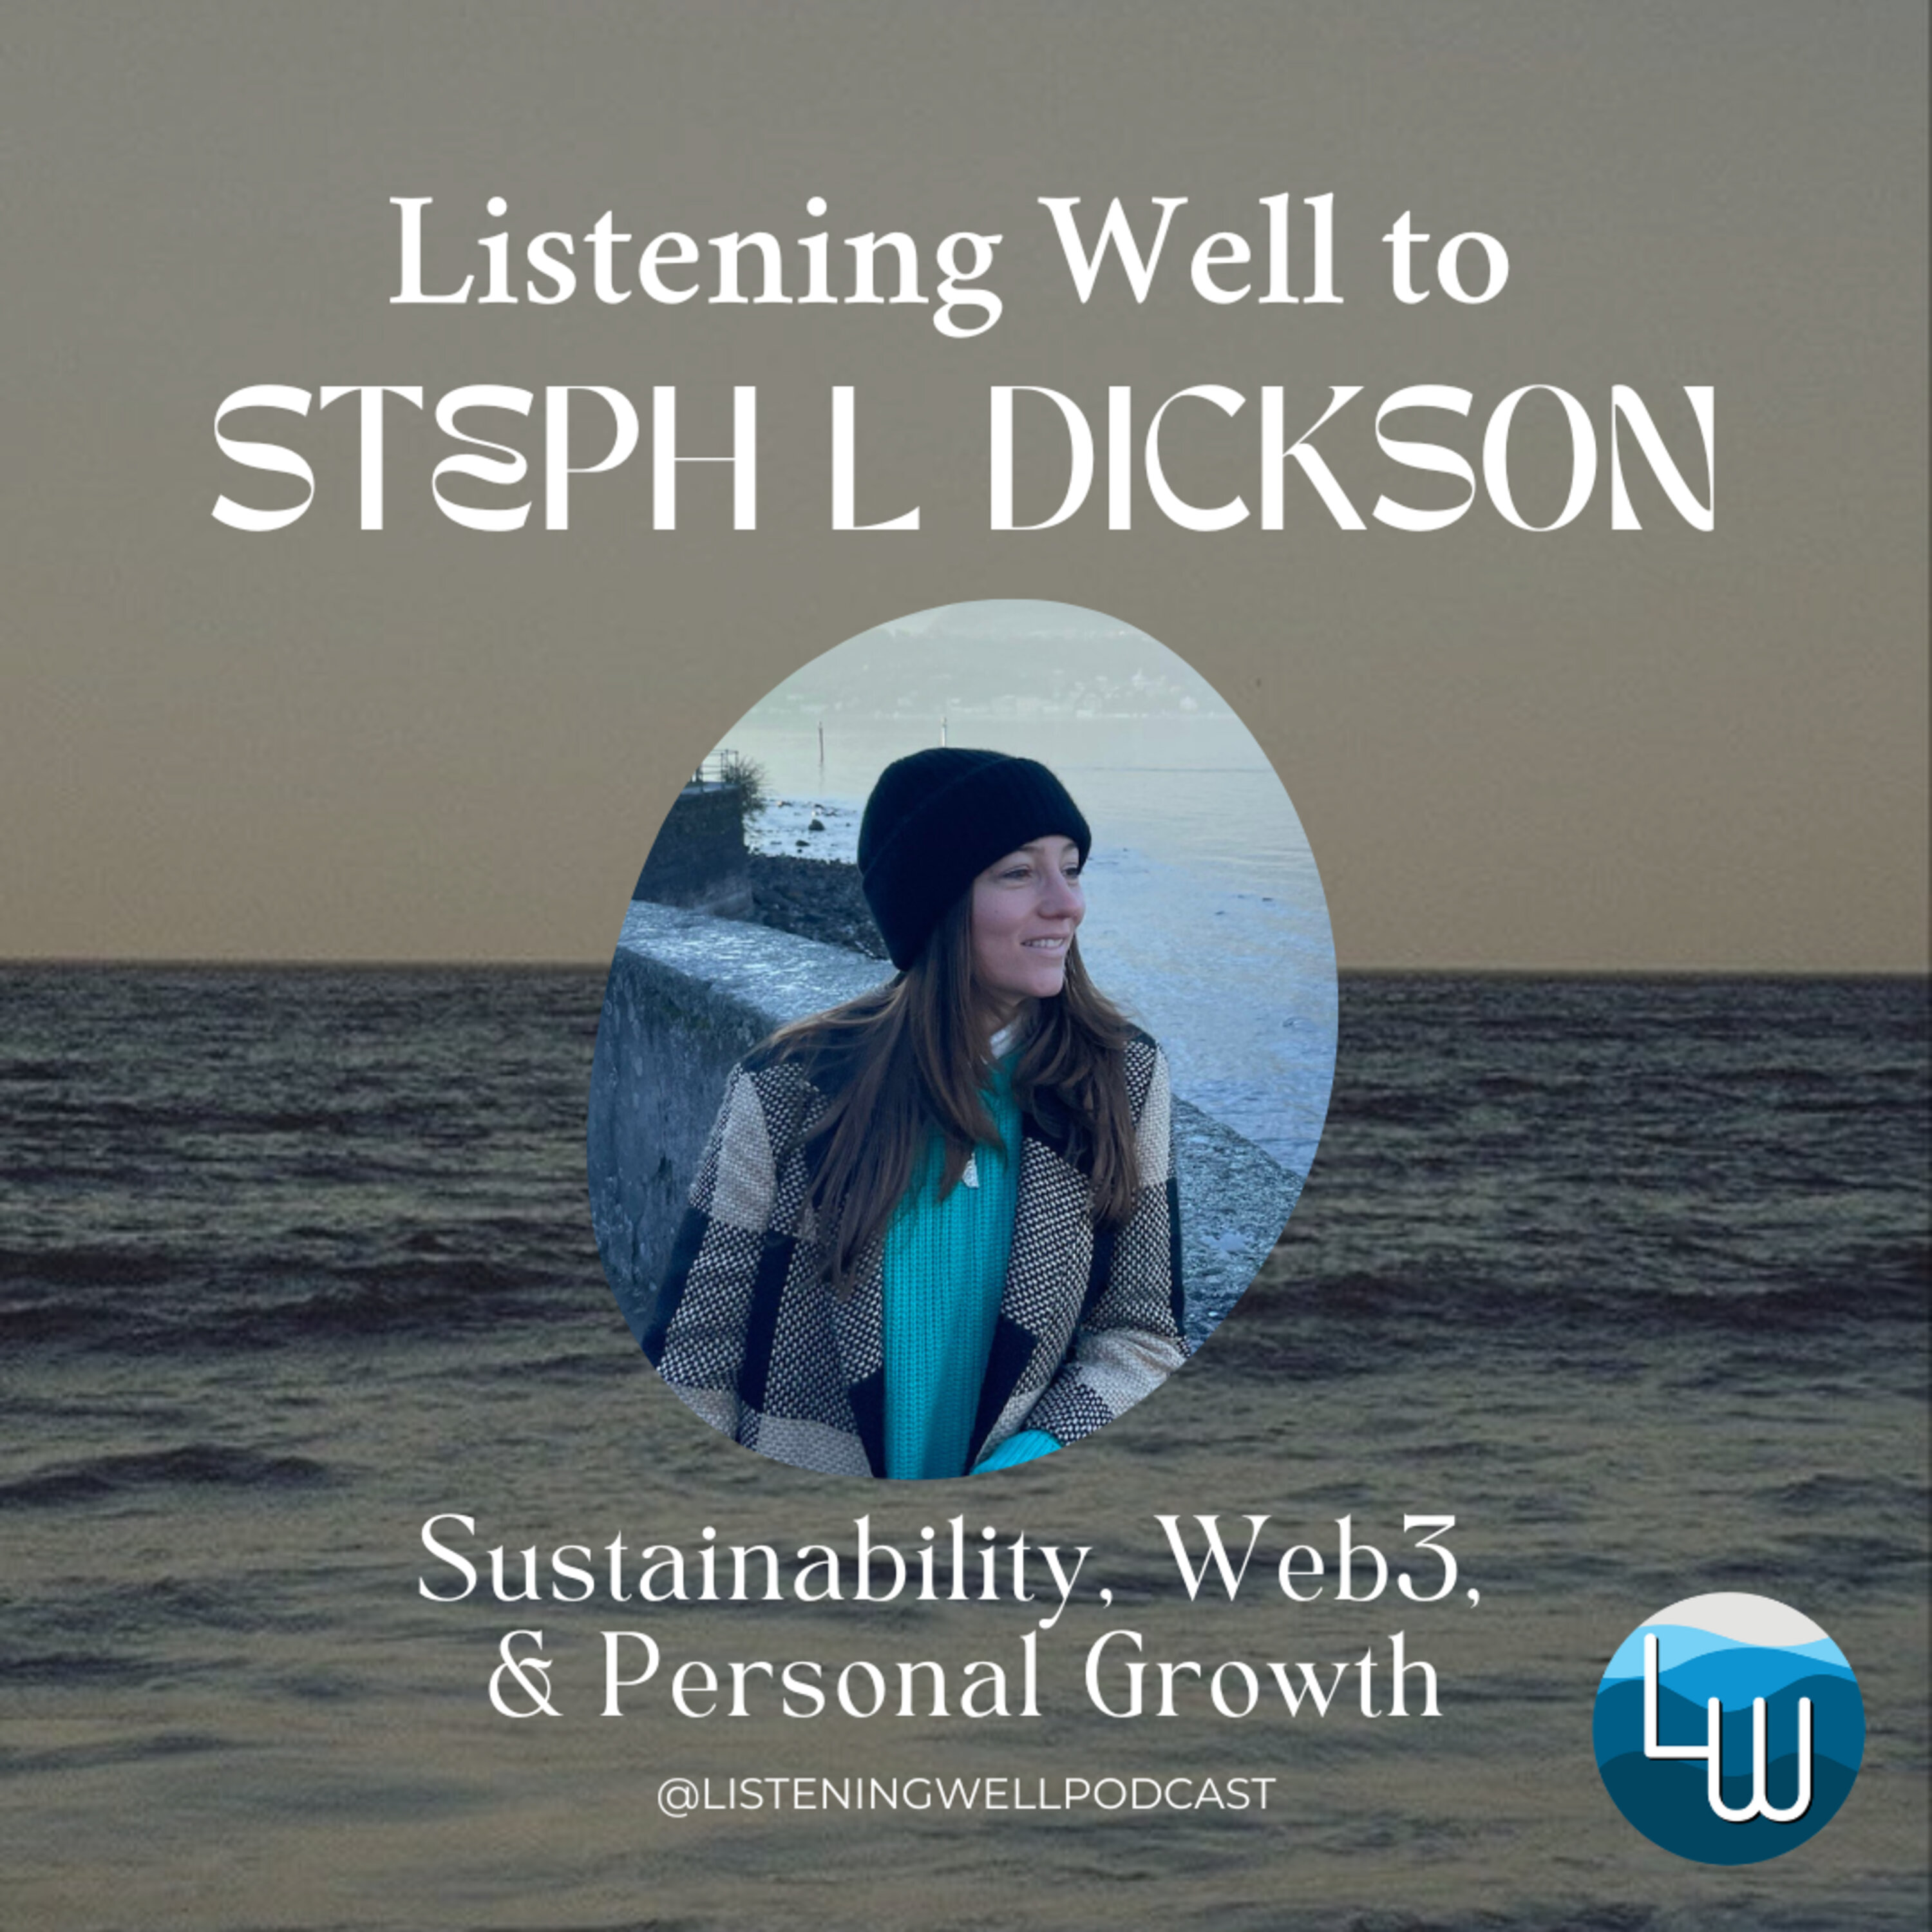 Sustainability, Web 3, and Personal Growth with Stephanie Dickson Image